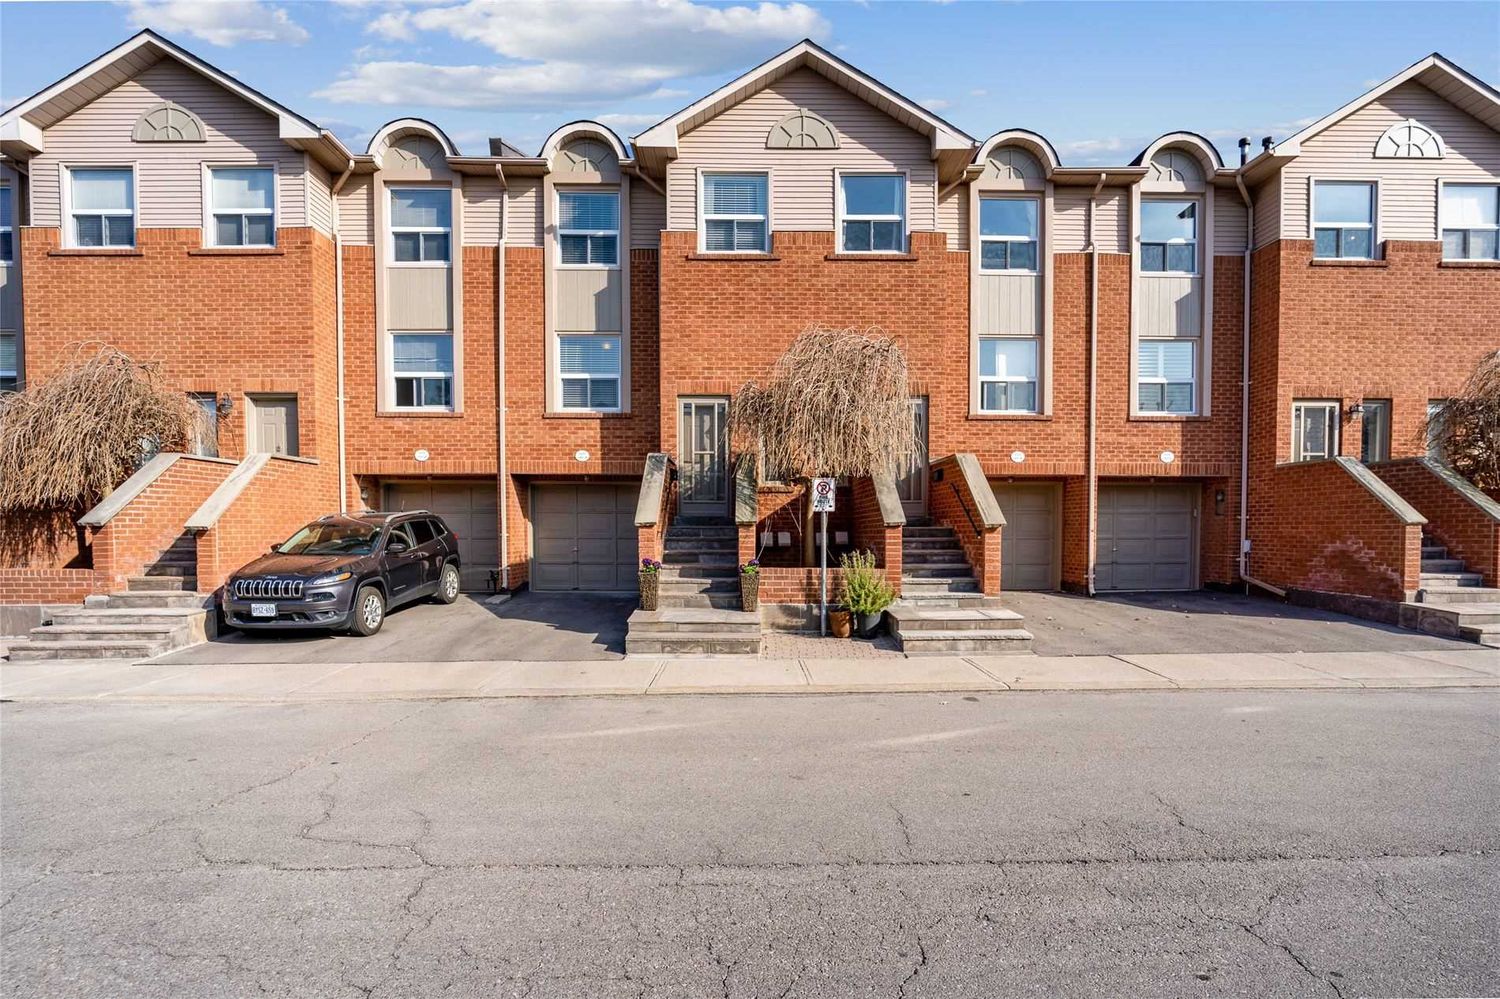 1500-1580 Reeves Gate. 1500 Reeves Gate Townhomes is located in  Oakville, Toronto - image #2 of 2